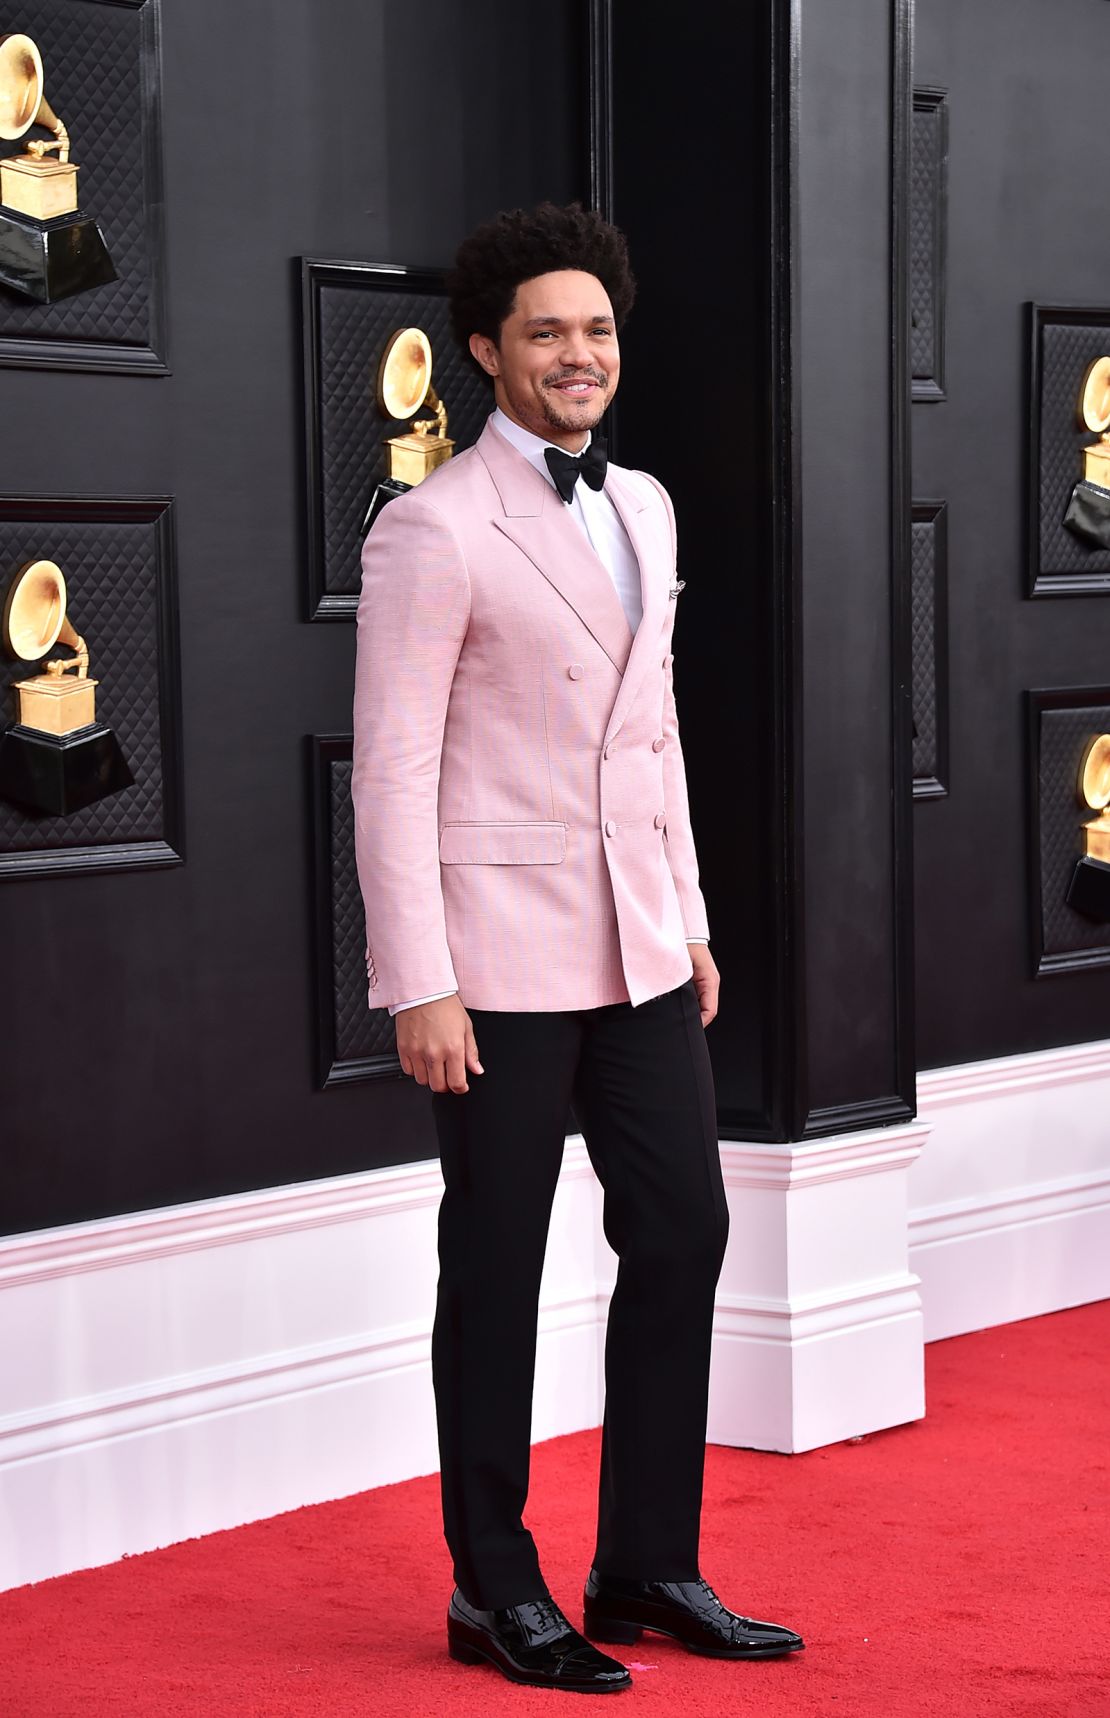 Grammy Awards 2022: Best fashion on the red carpet